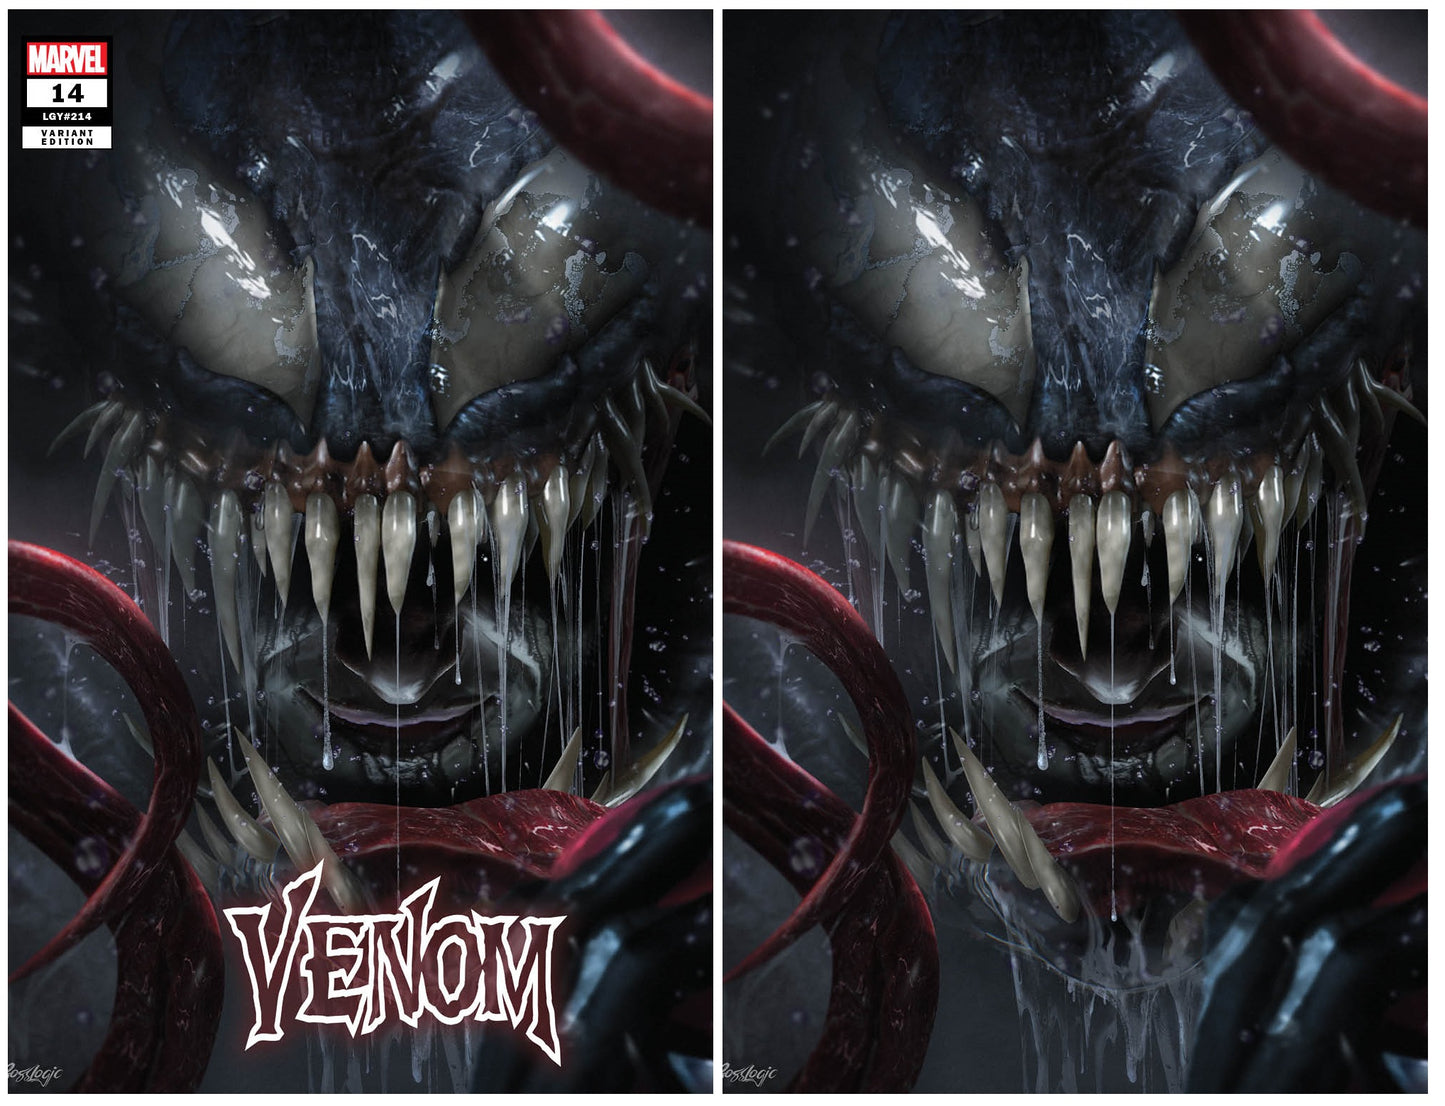 VENOM #14 BOSSLOGIC TRADE DRESS/VIRGIN VARIANT LIMITED TO 600 SETS WITH NUMBERED COA